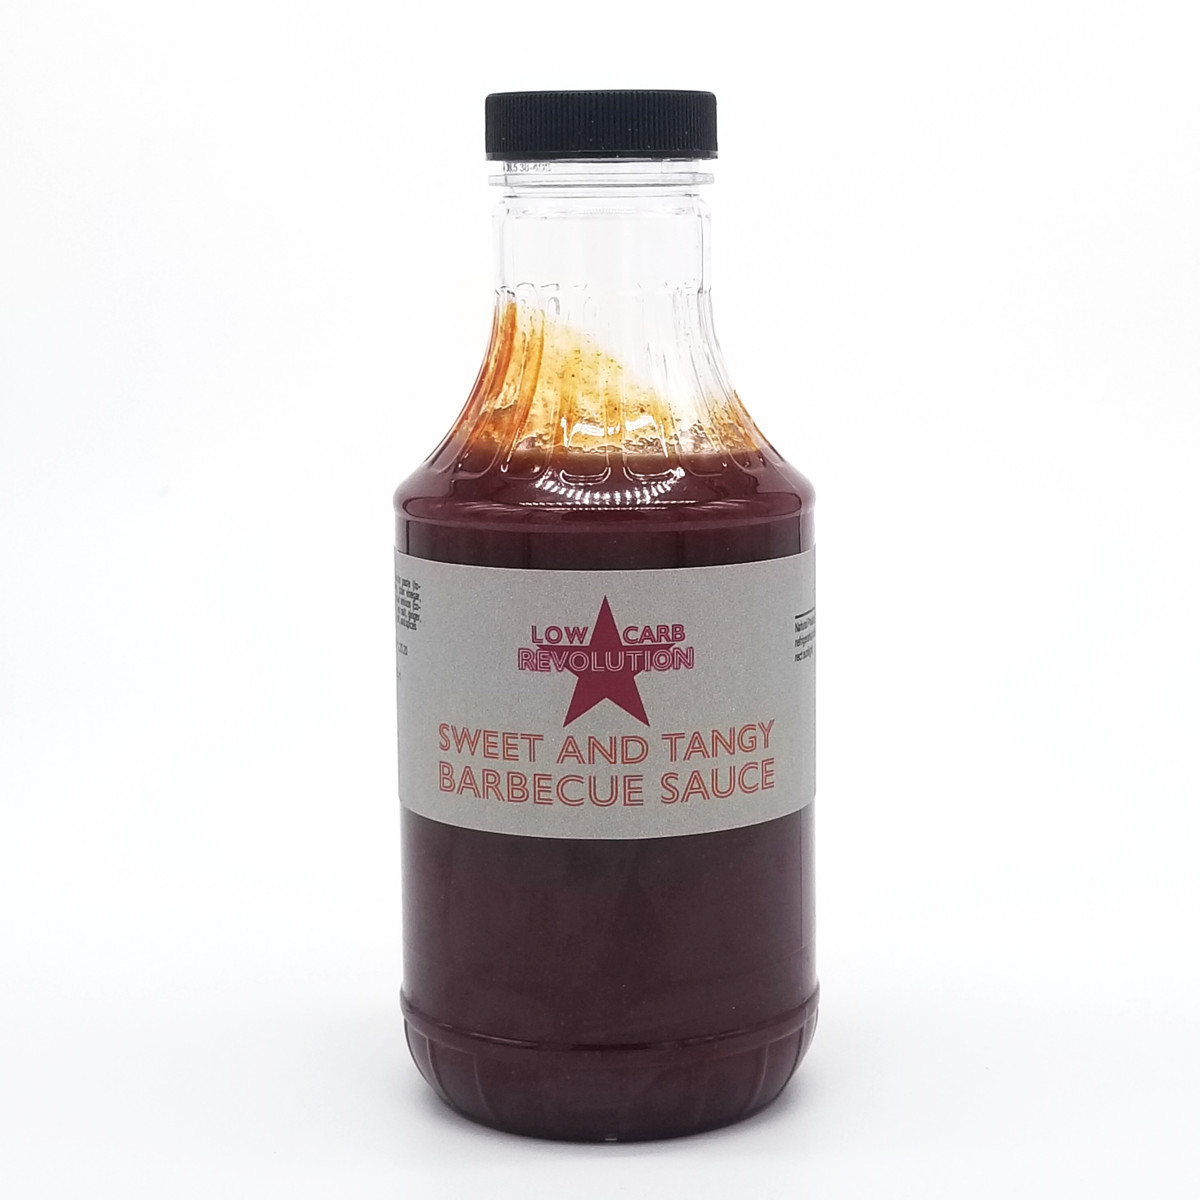 Sweet And Tangy Bbq Sauce
 Sweet and Tangy Barbecue Sauce – Low Carb Revolution